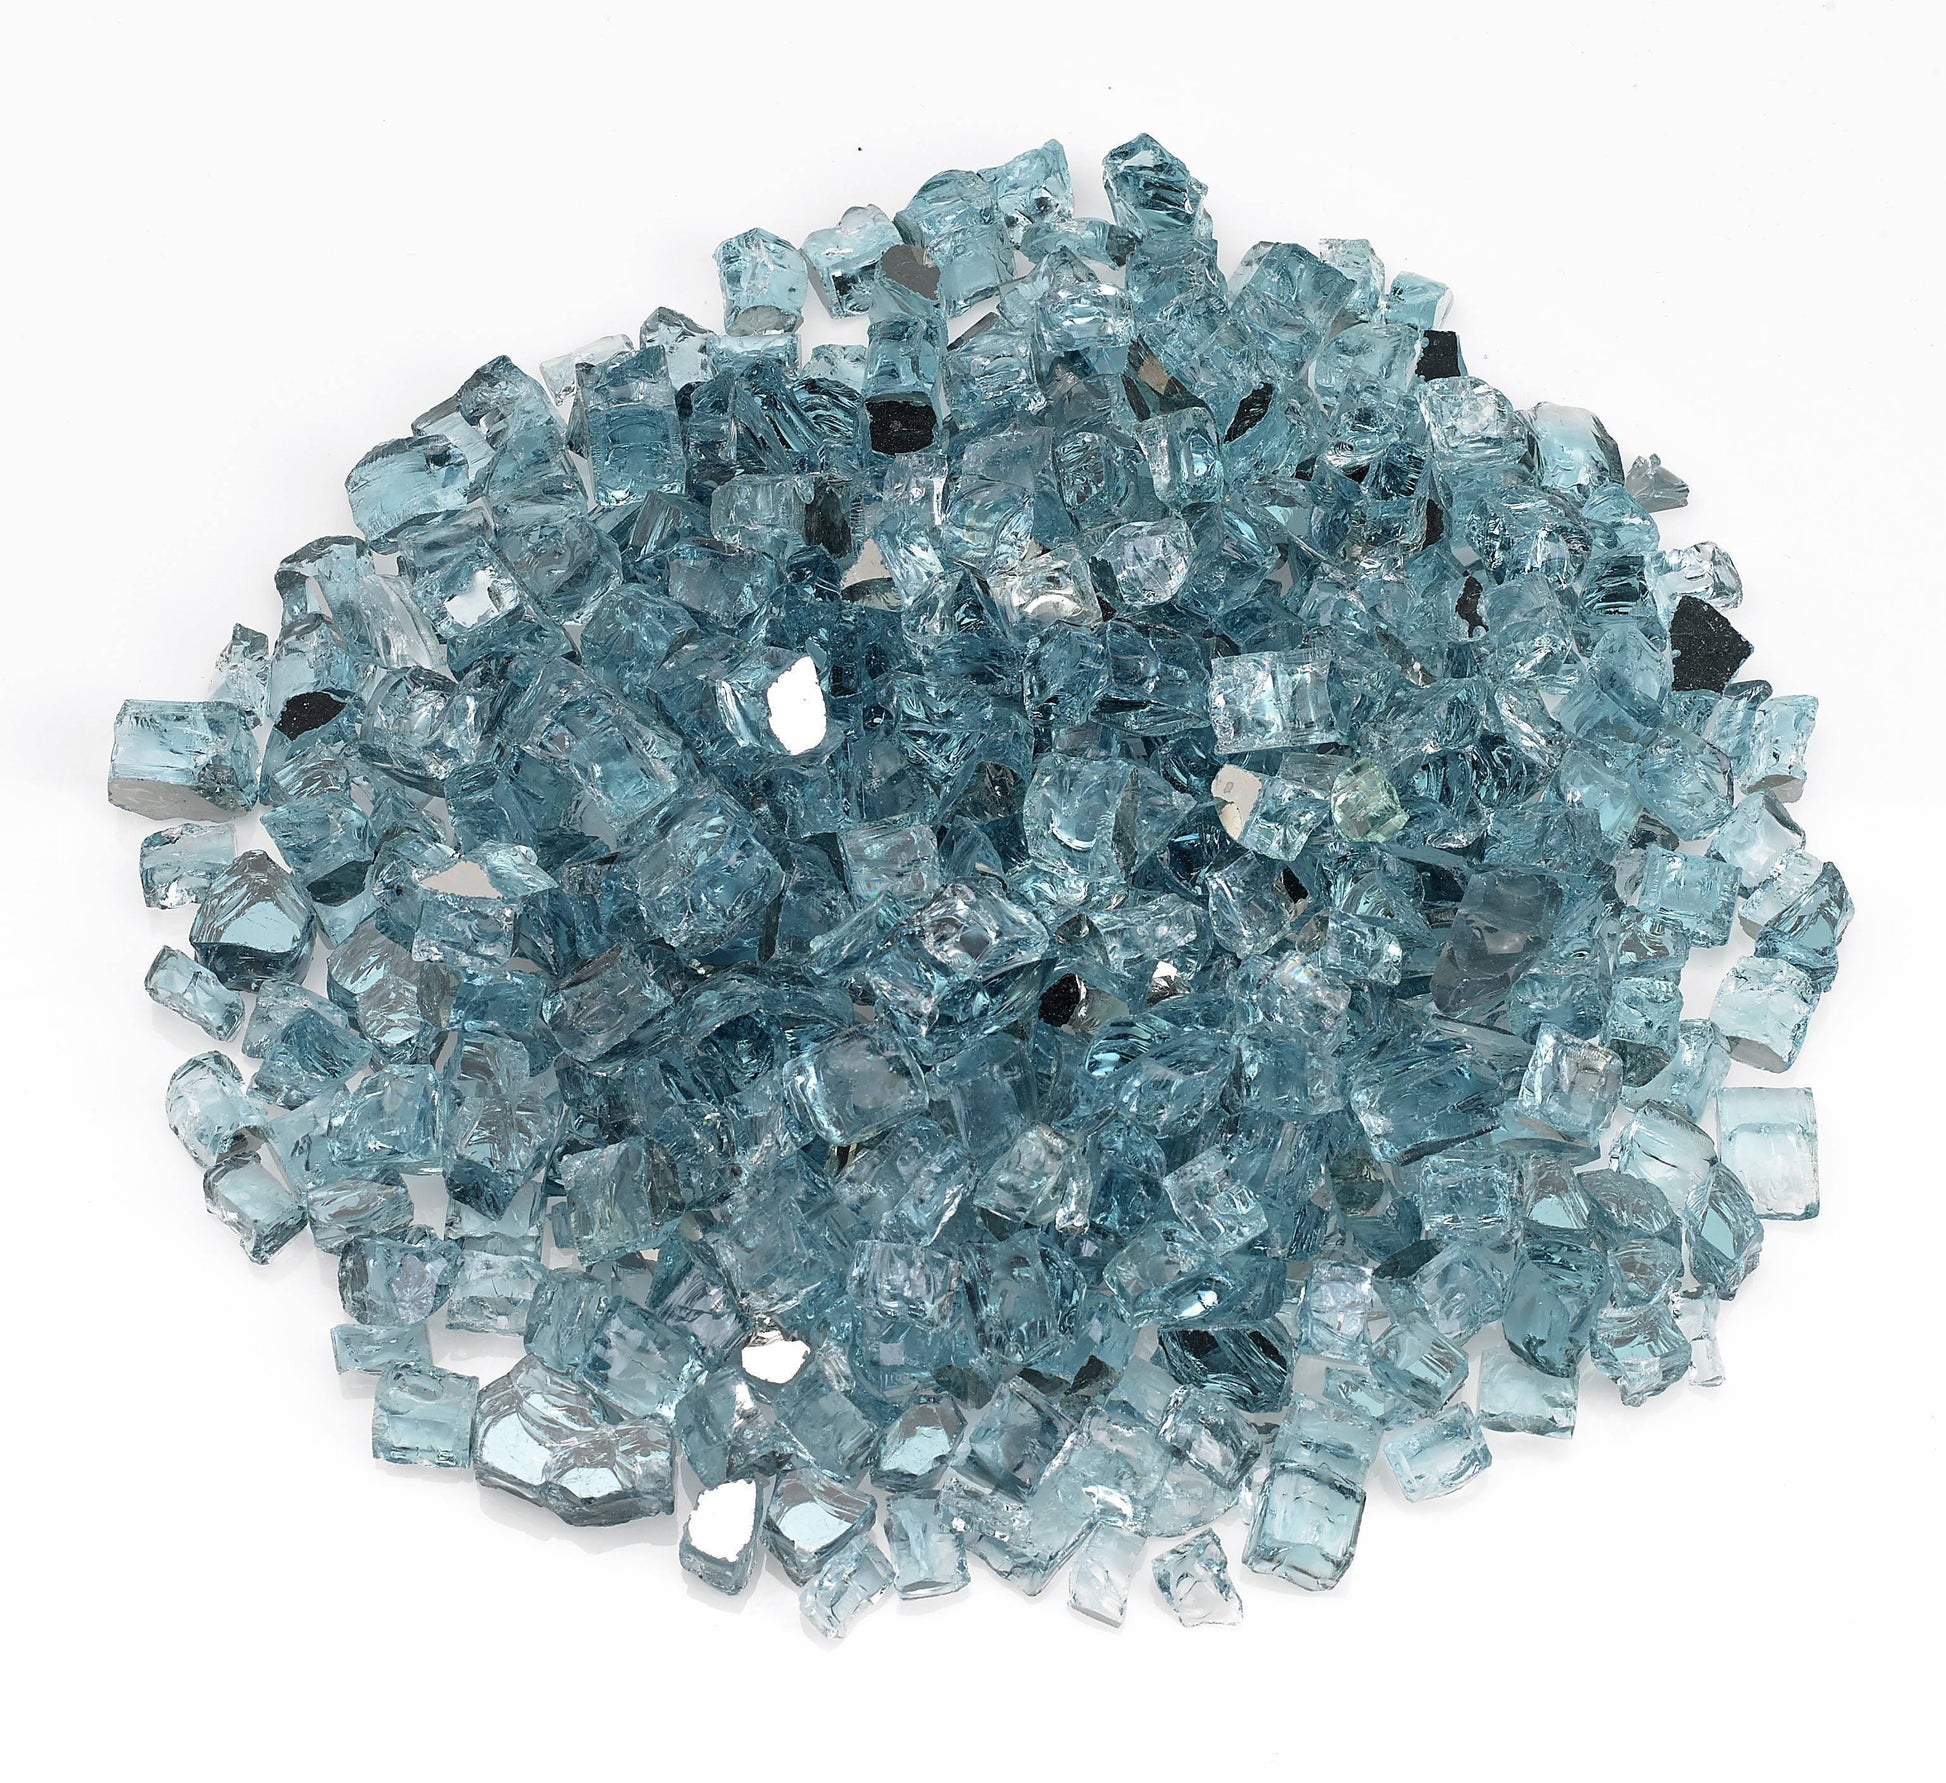 Fire by Design Reflective Collection 1/2" Azuria Reflective Fire Glass - (10lb Bag)